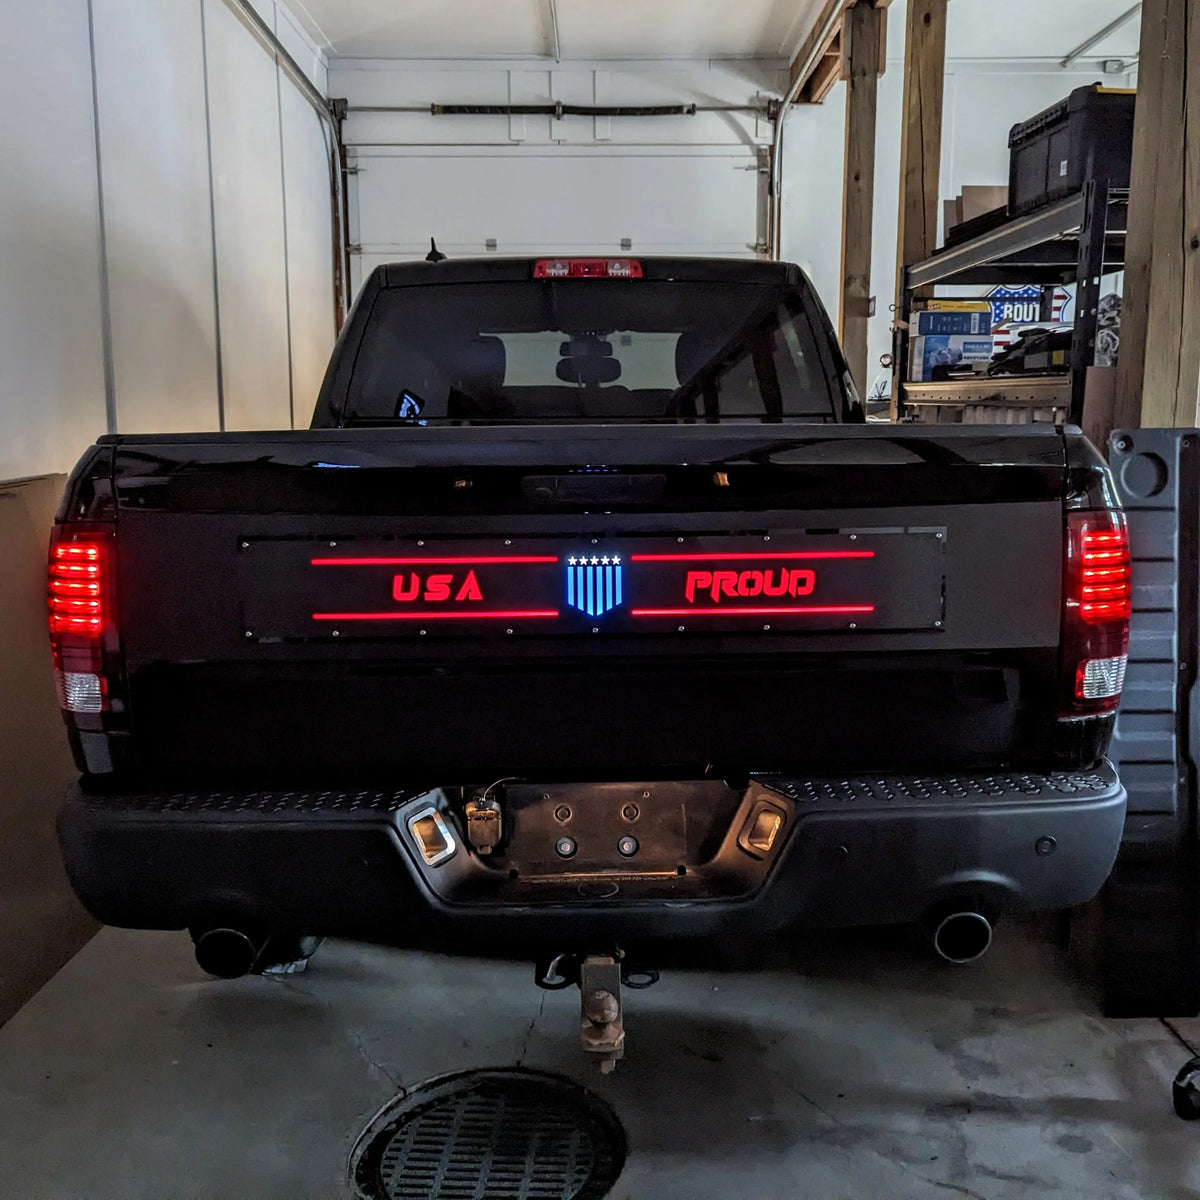 USA Proud LED Tailgate Applique - Fits 2009-2018 RAM® 1500 and 2019-2022 RAM Classic